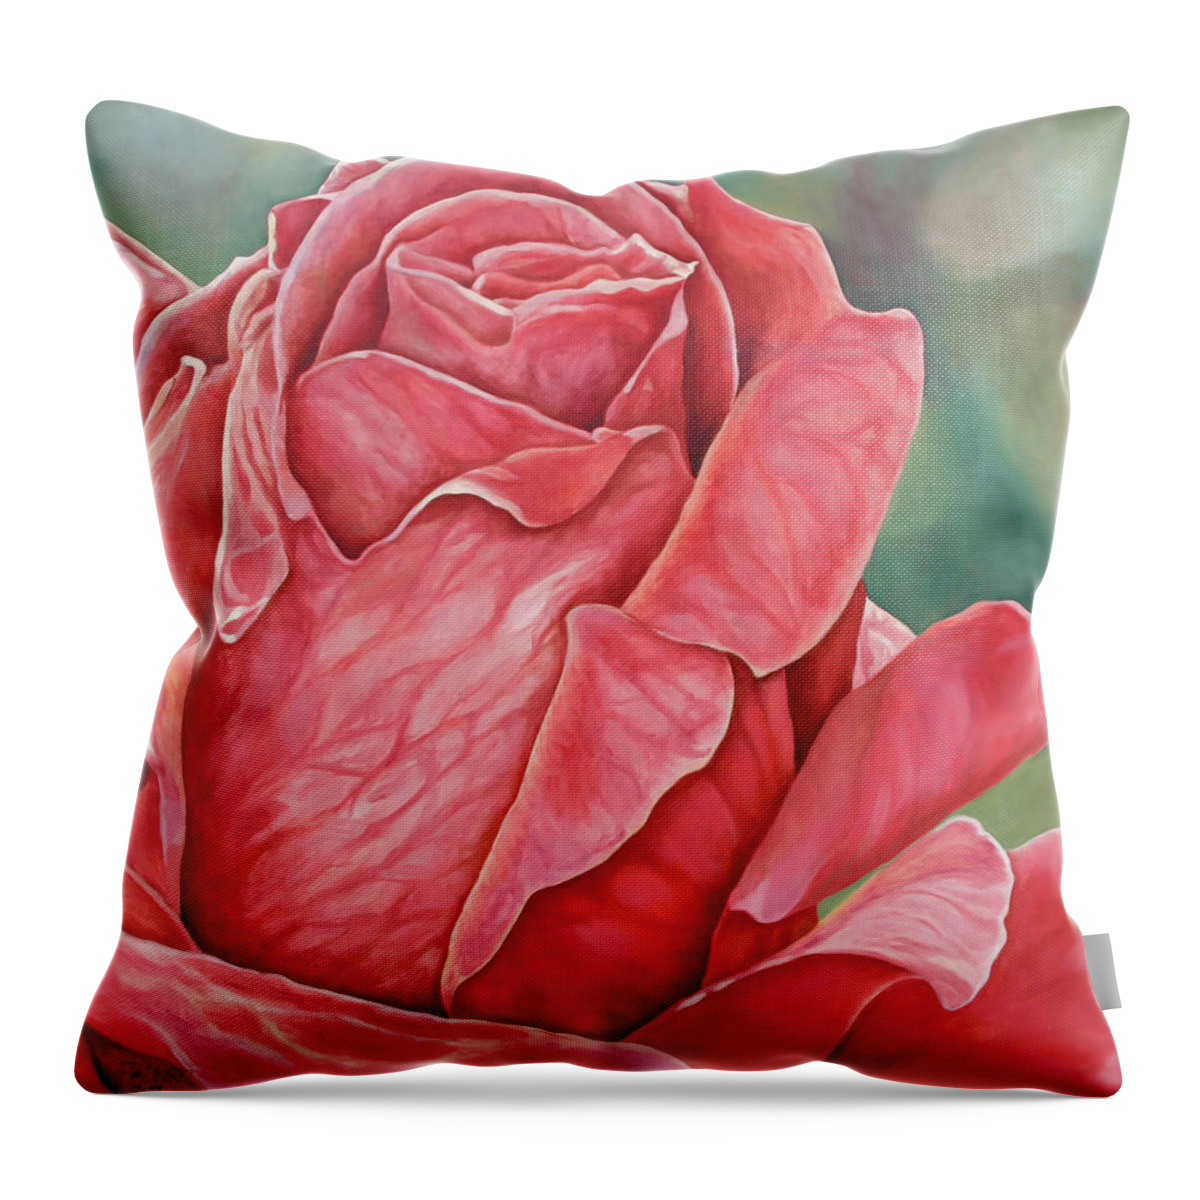 Oil Painting Throw Pillow featuring the painting Red Rose 93 by Steven Ward